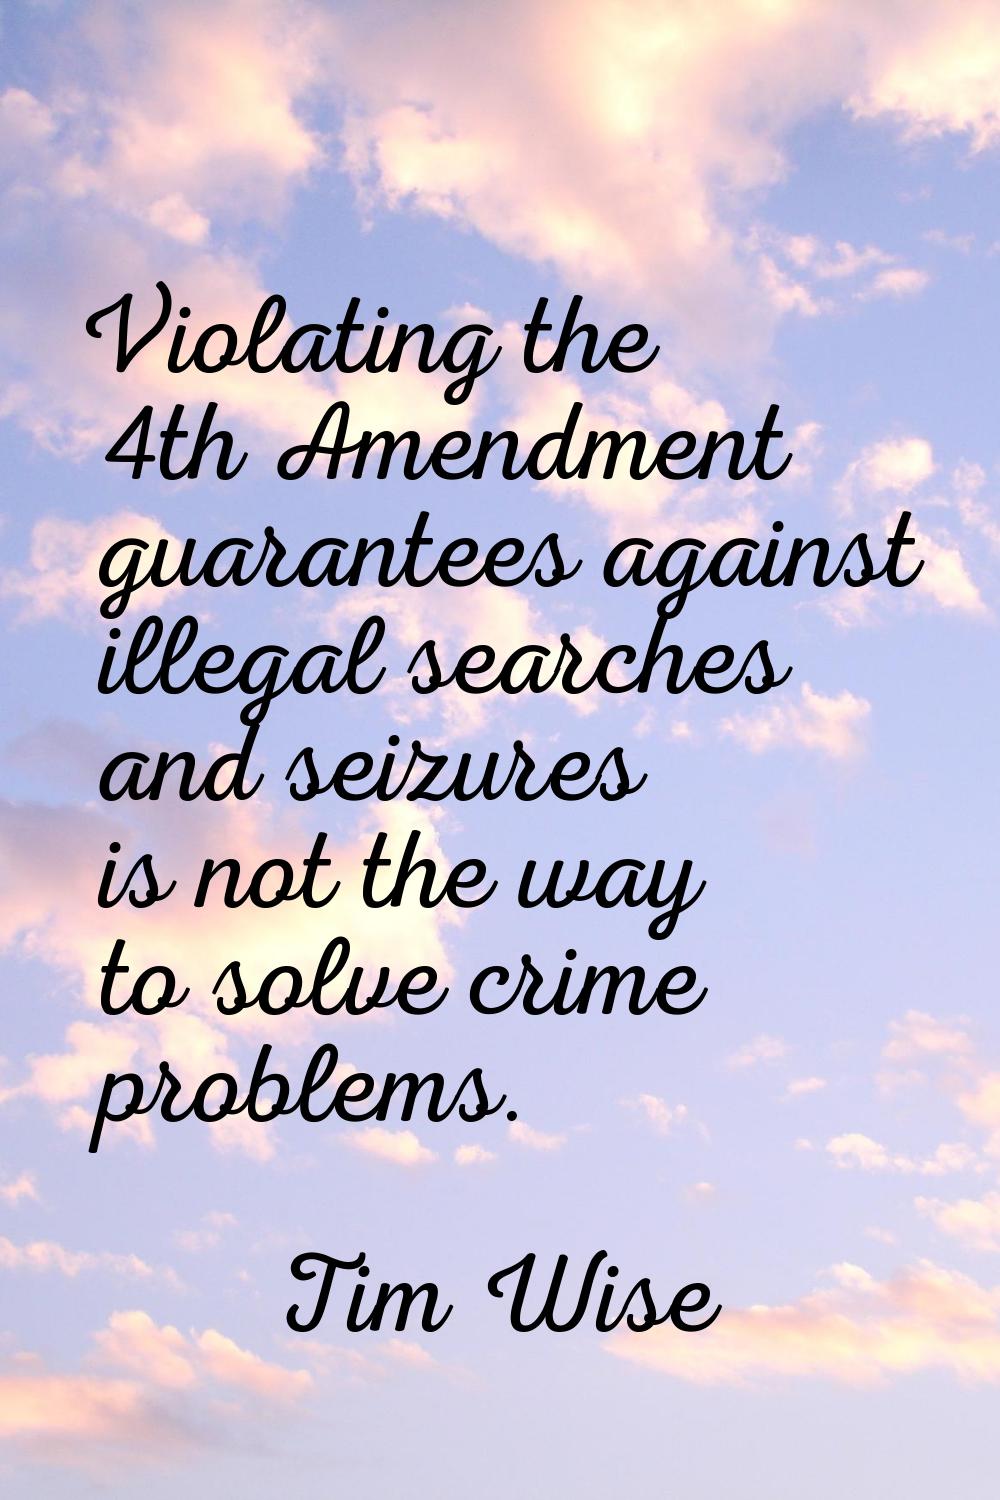 Violating the 4th Amendment guarantees against illegal searches and seizures is not the way to solv